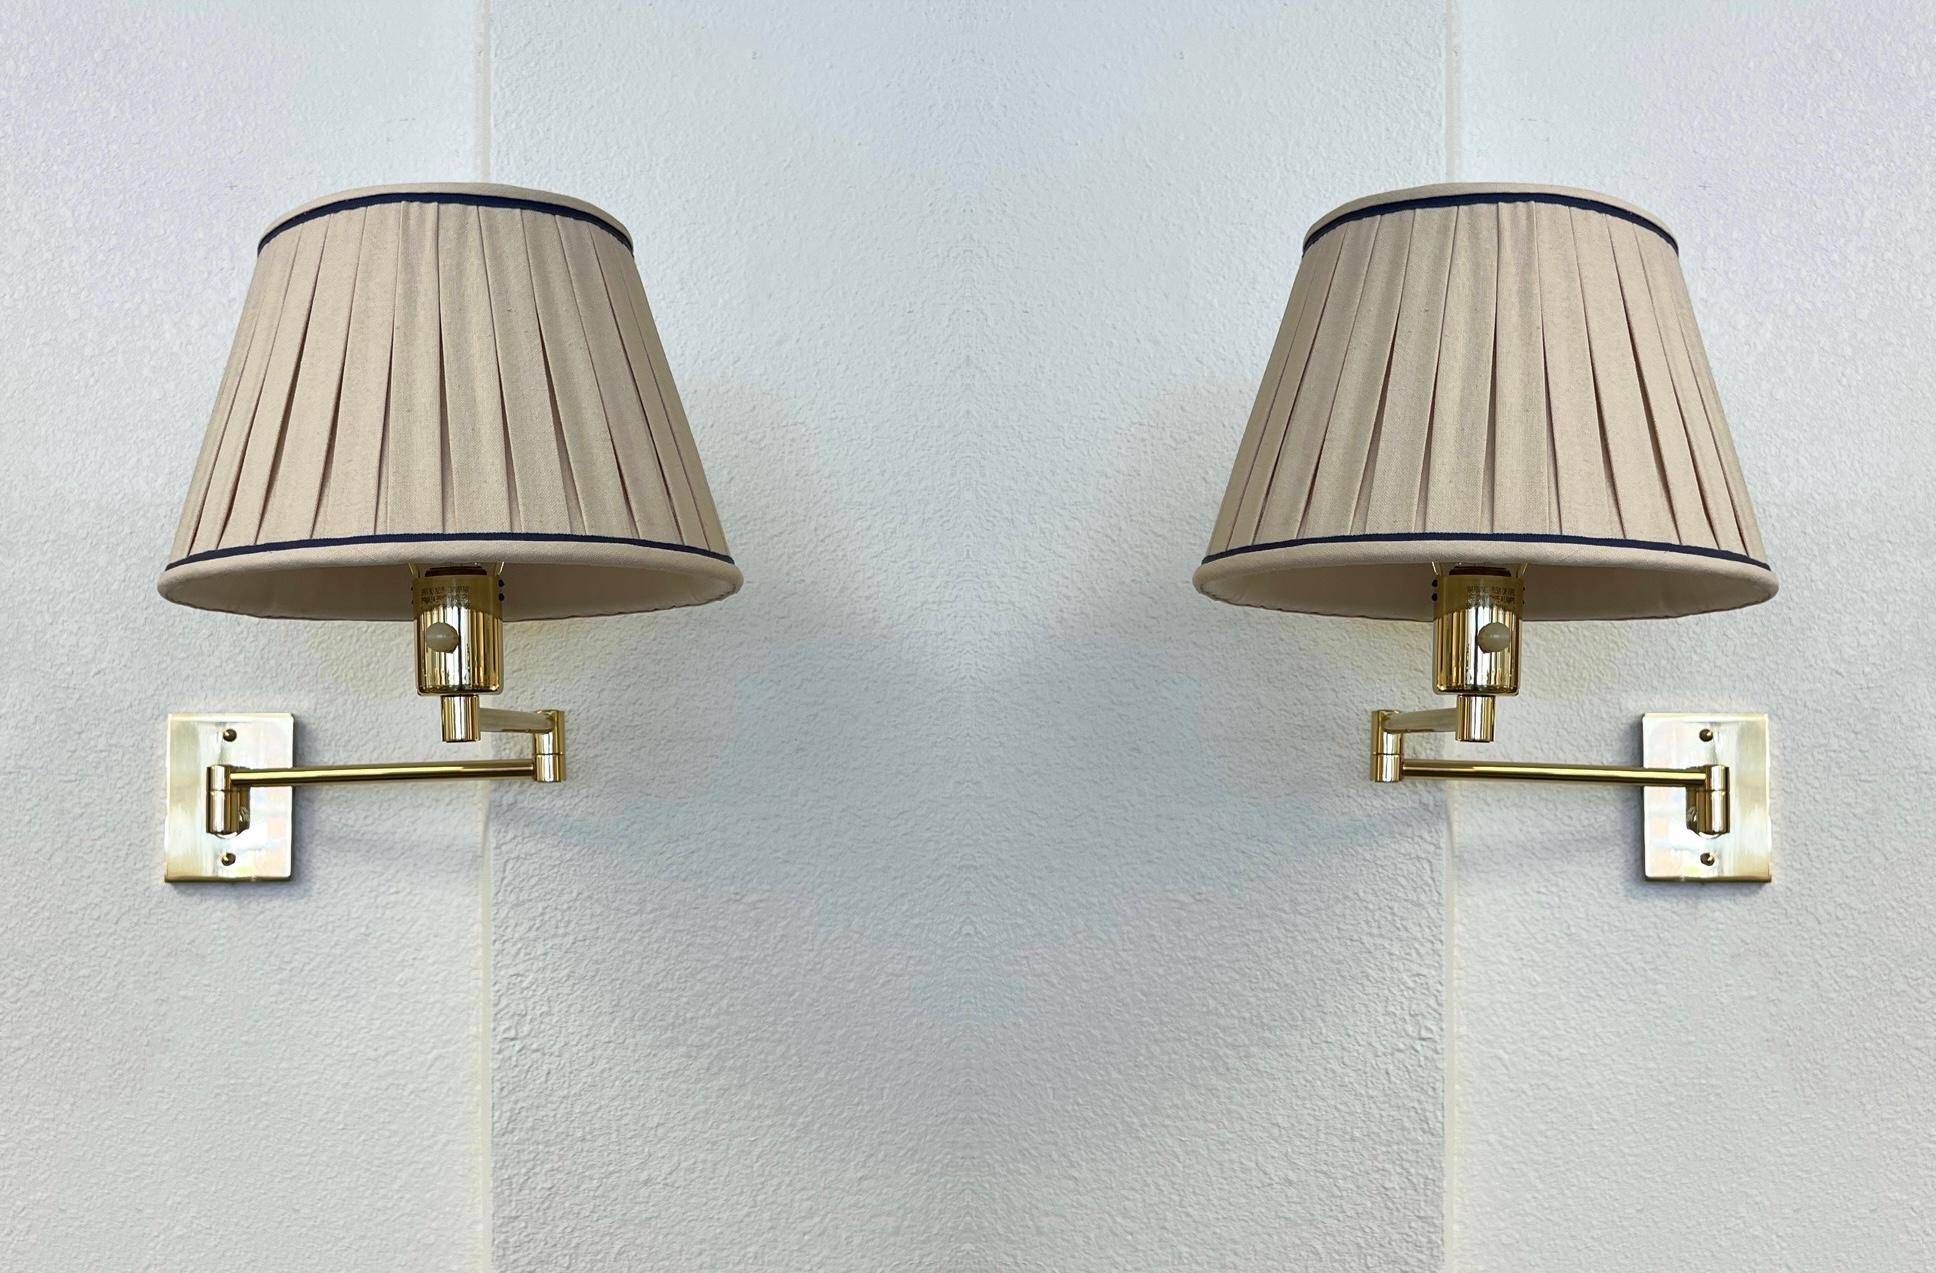 1970’s Pair of adjustable polish brass and linen wall sconces designed by George W. Hansen for Hanse Lamps NY. 

In beautiful vintage condition, shows minor wear consistent with age. 
Original lamp shades constructed of natural linen with a purple